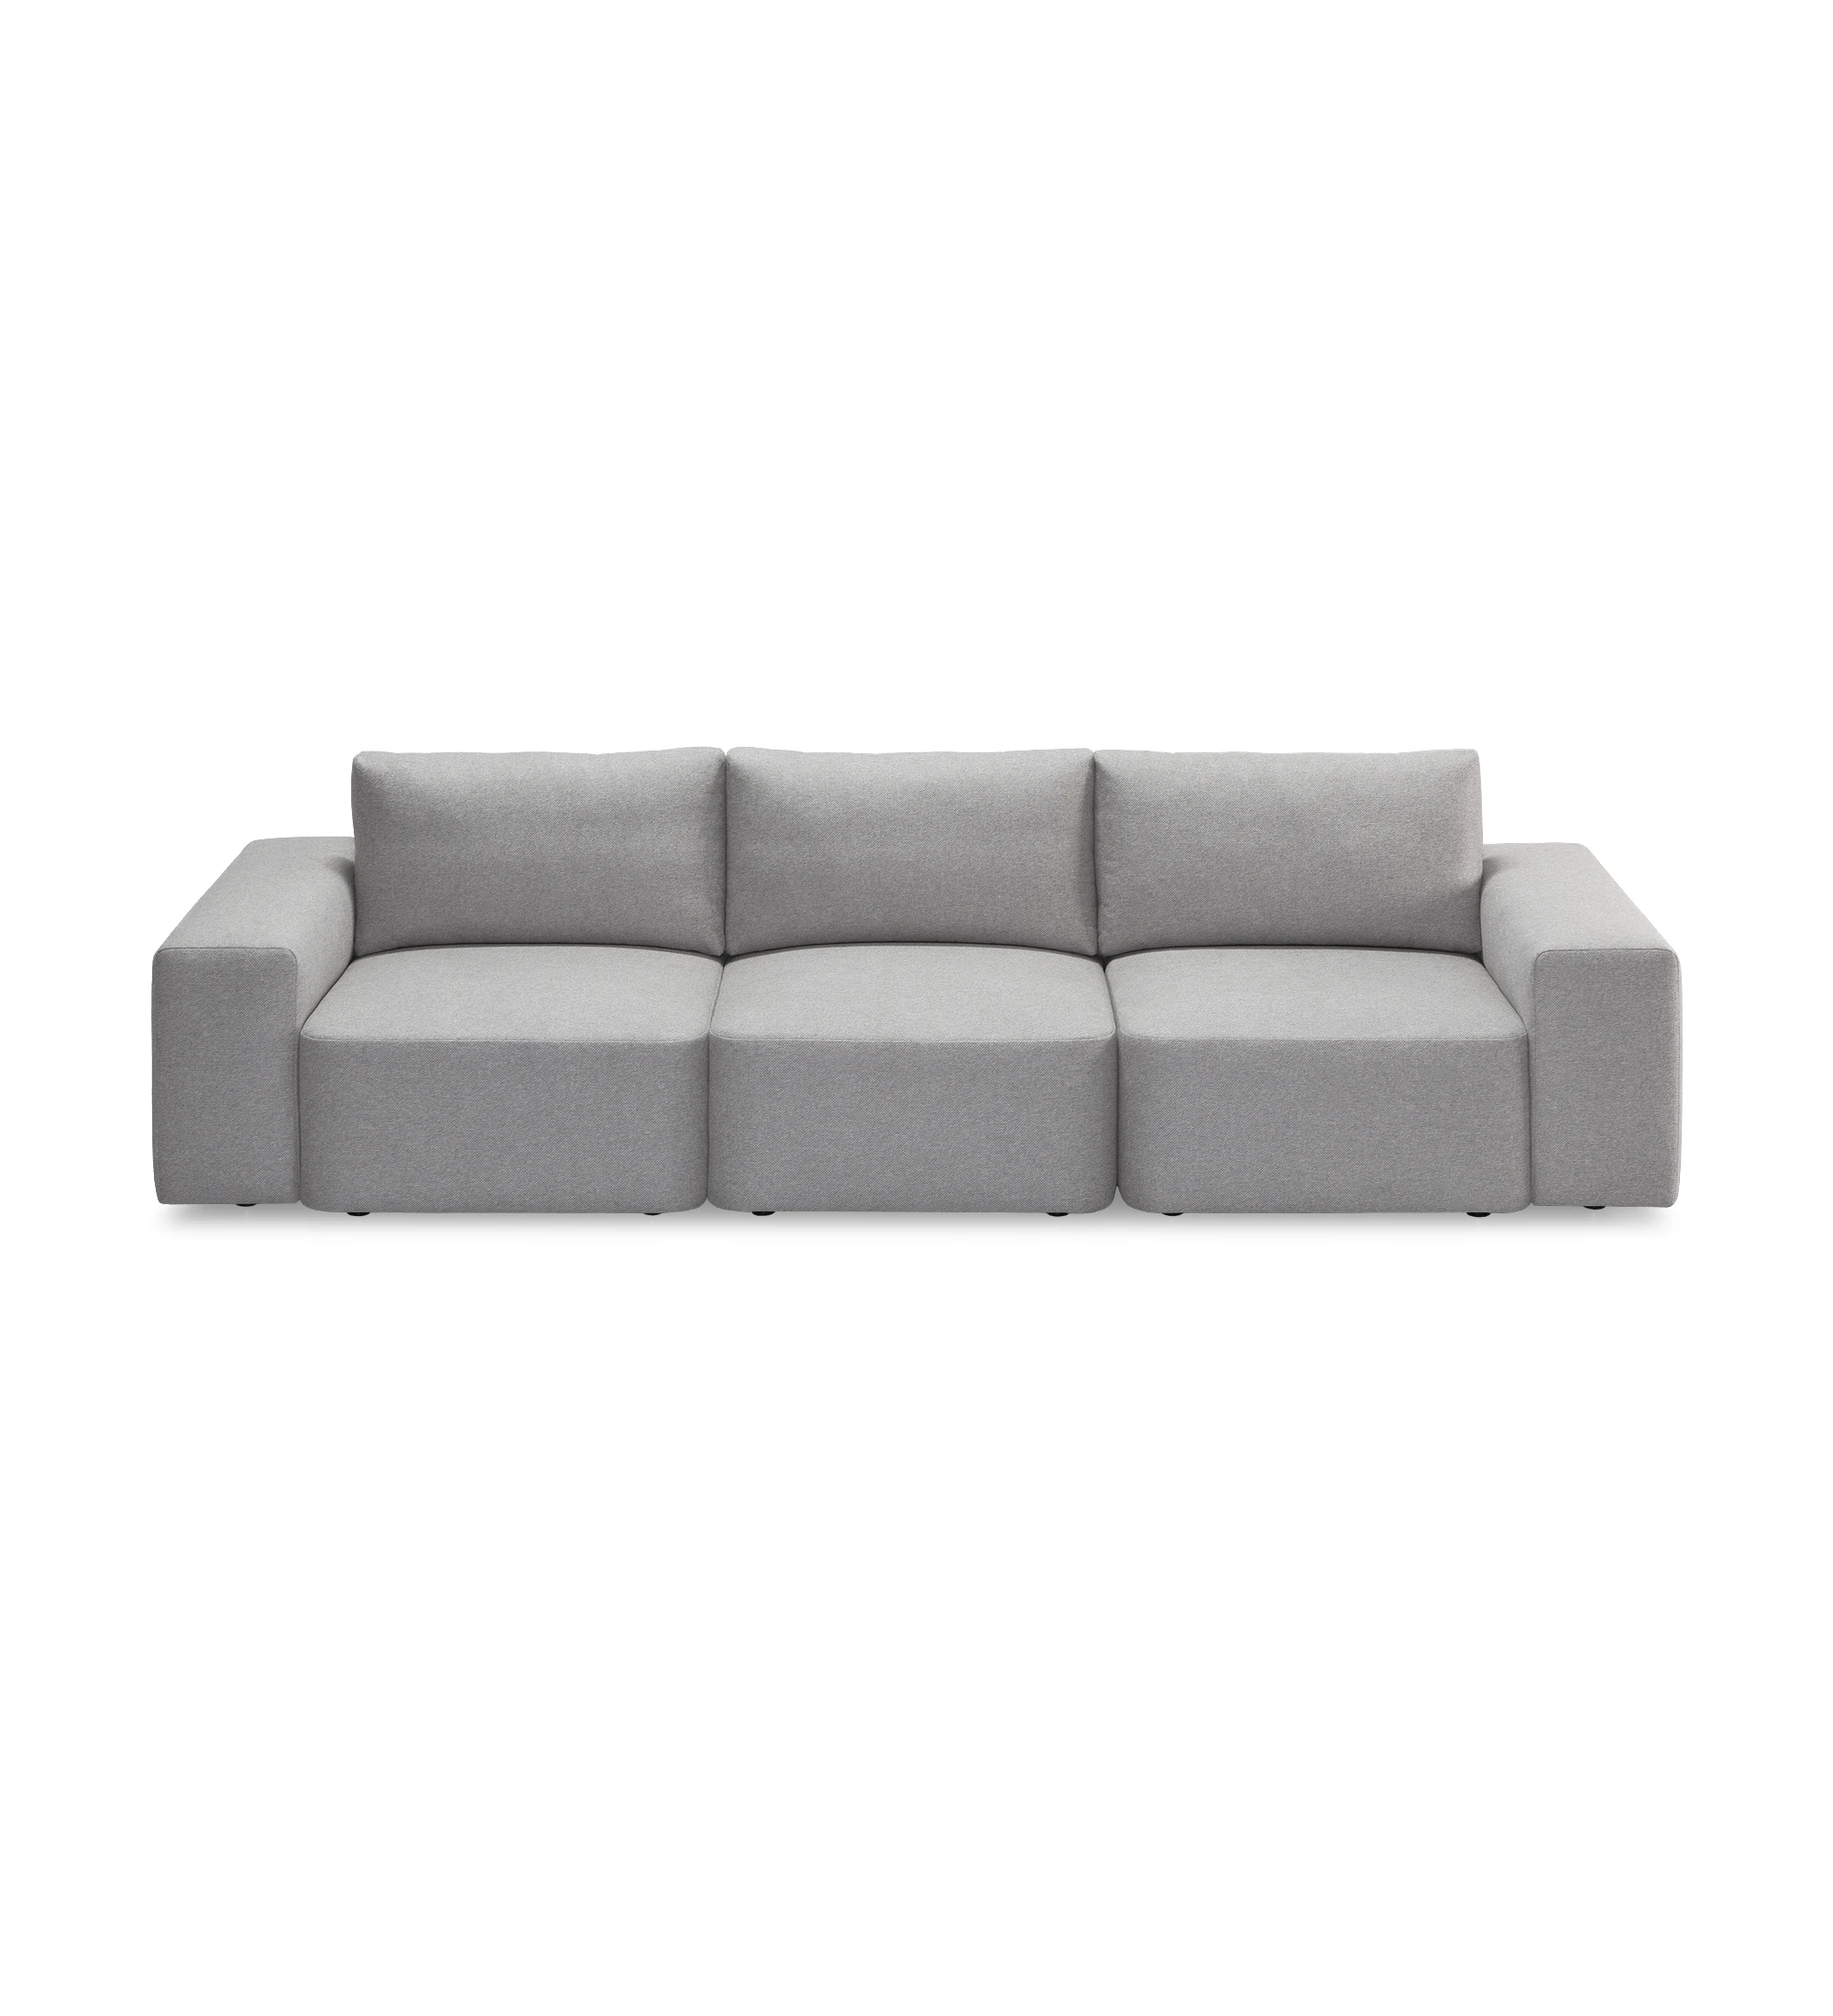 Paris 3-seater sofa upholstered in gray fabric, 296 cm.